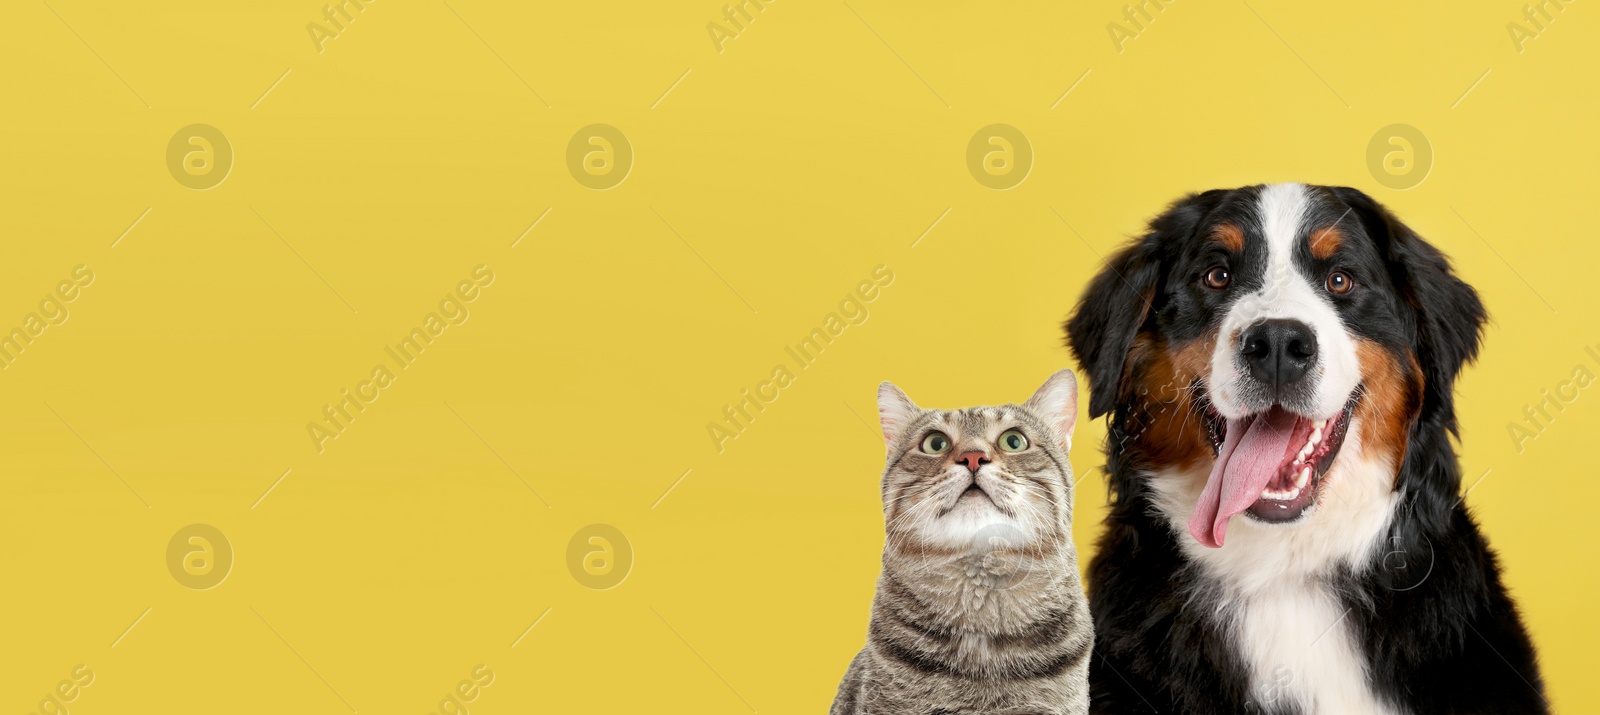 Image of Cute cat and adorable dog on yellow background. Banner design with space for text